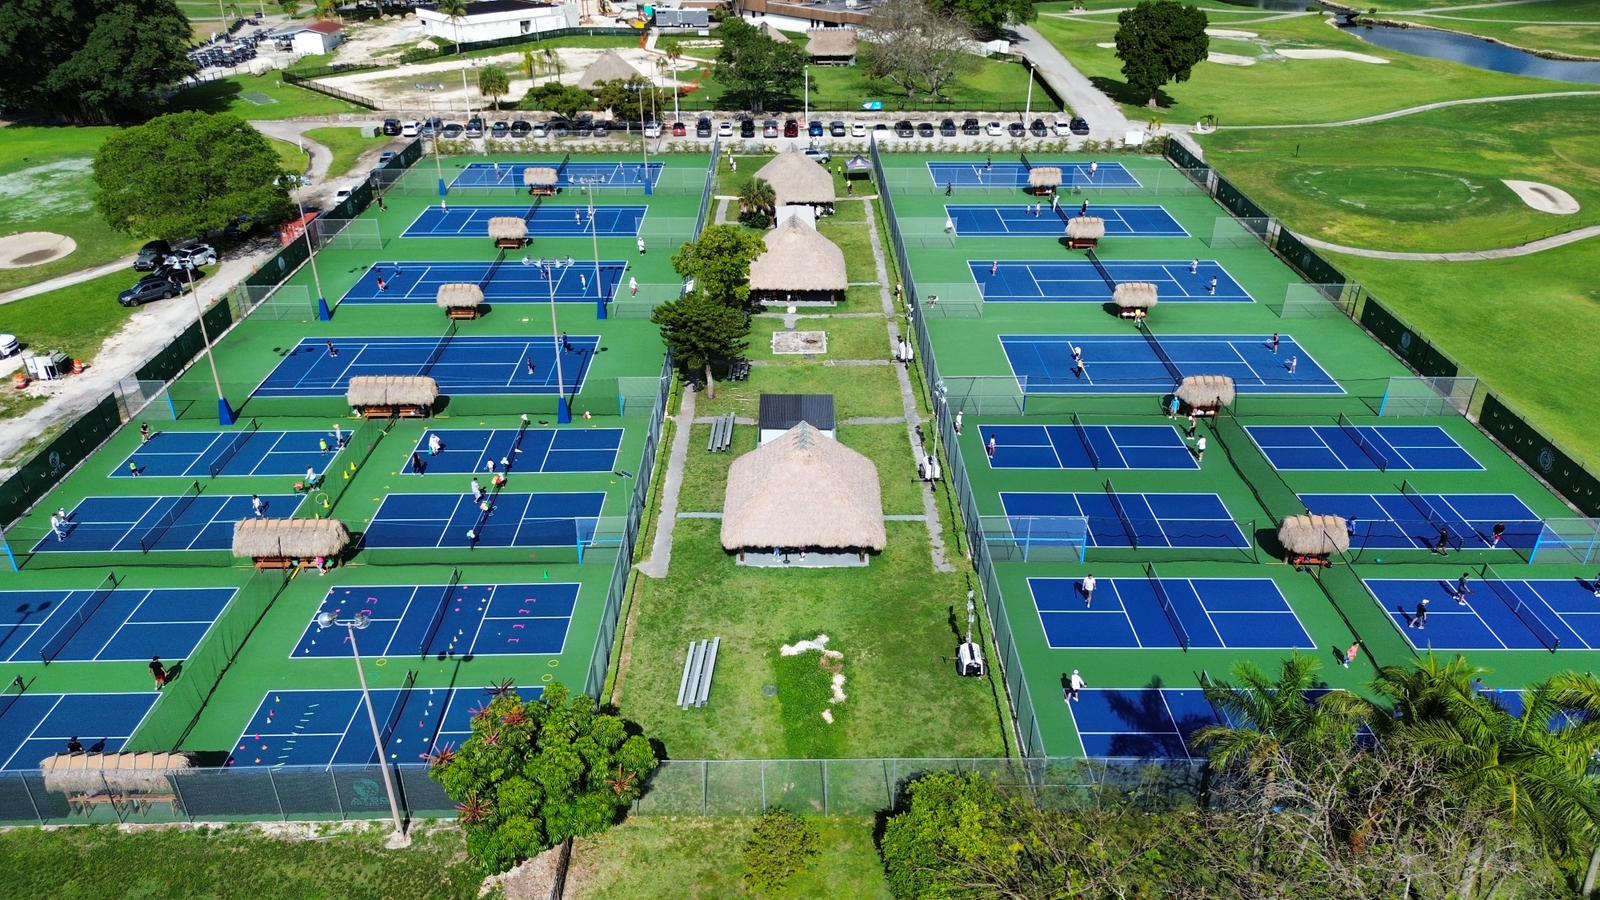 David Ensignia Tennis Academy's DETA Pickleball Club features 16 dedicated courts, making it the largest pickleball facility in Miami-Dade County.